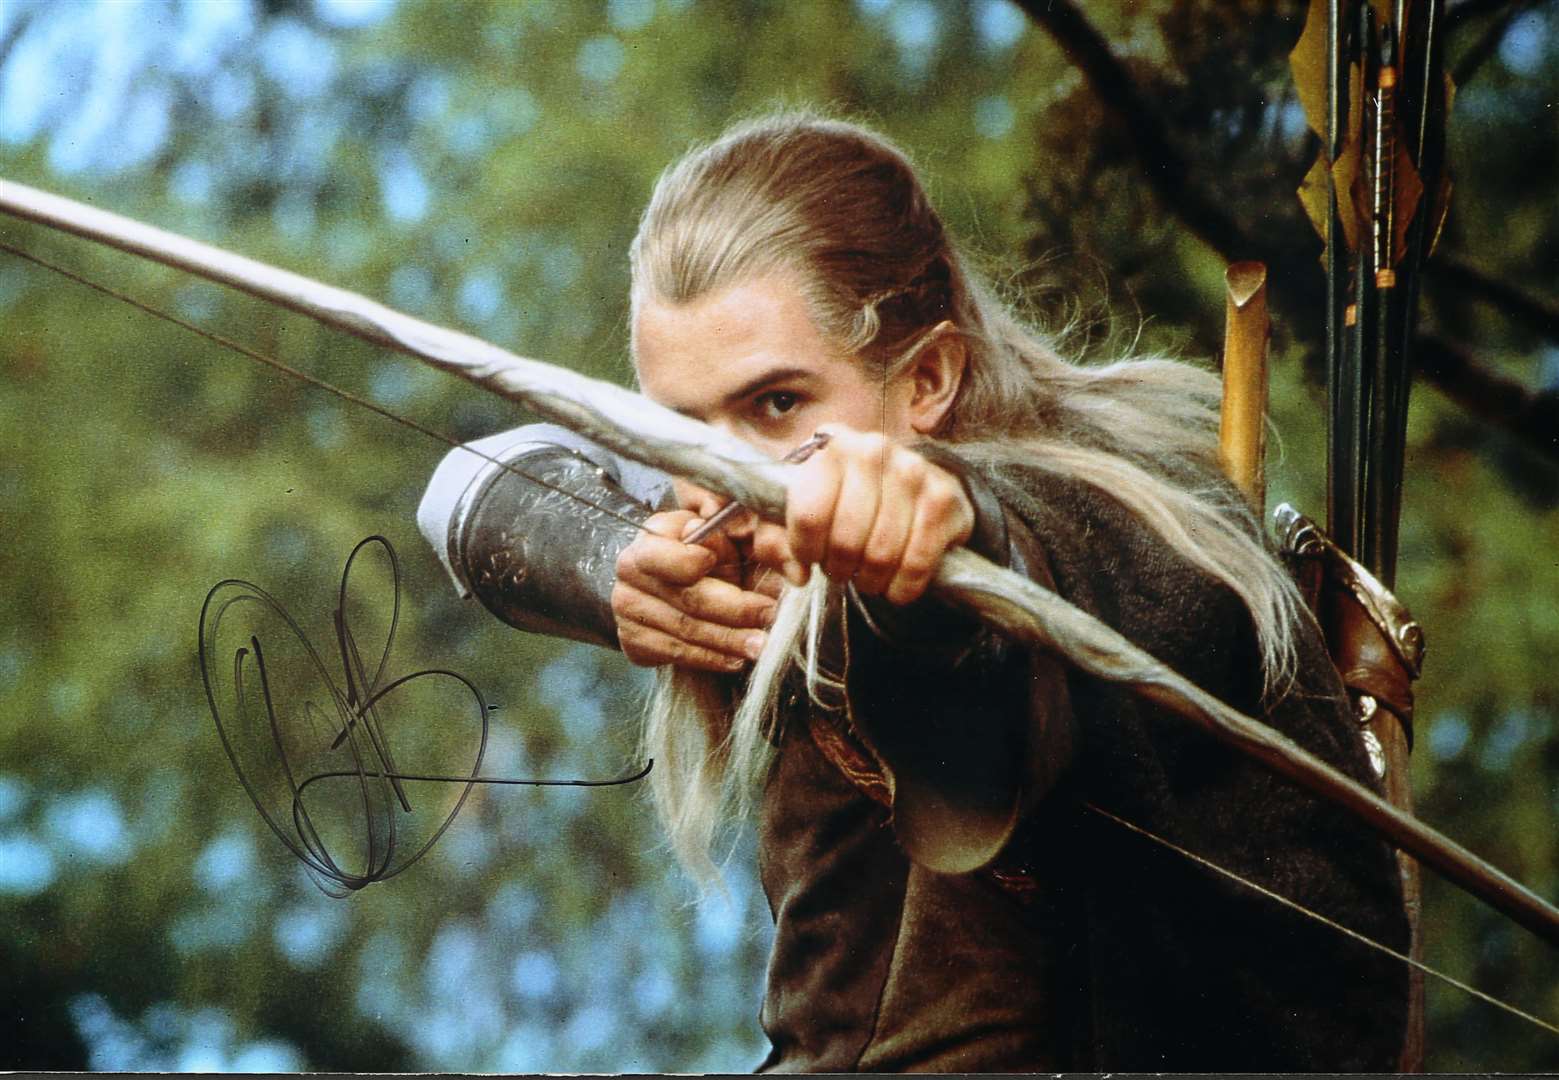 Orlando Bloom as Legolas, using his famous bow and arrow